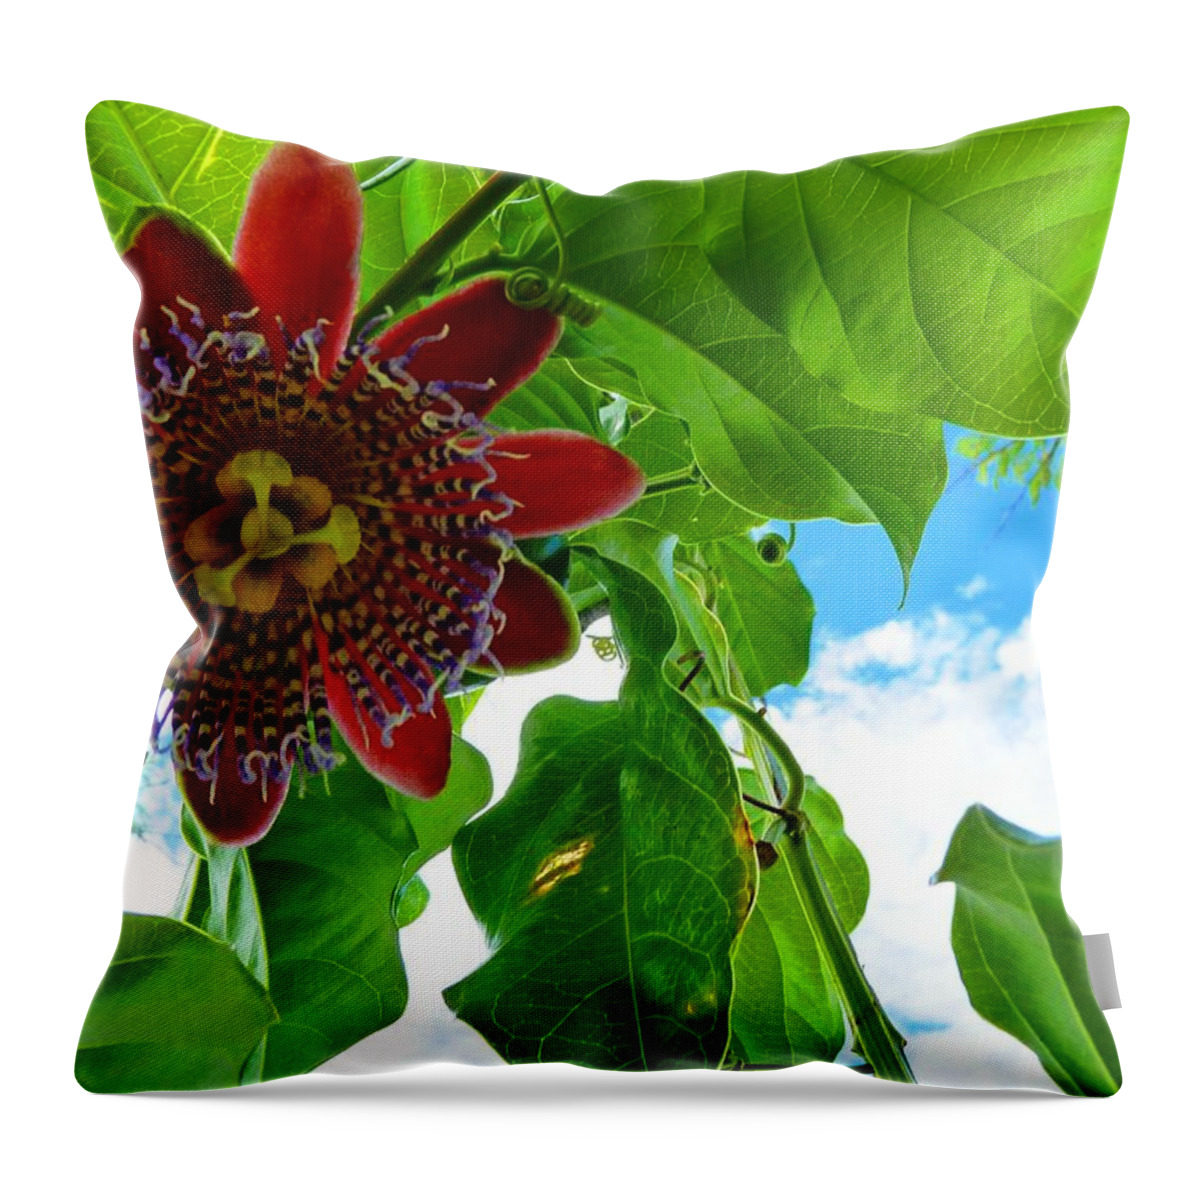 Serenity Throw Pillow featuring the photograph Serenity #1 by Julia Ivanovna Willhite